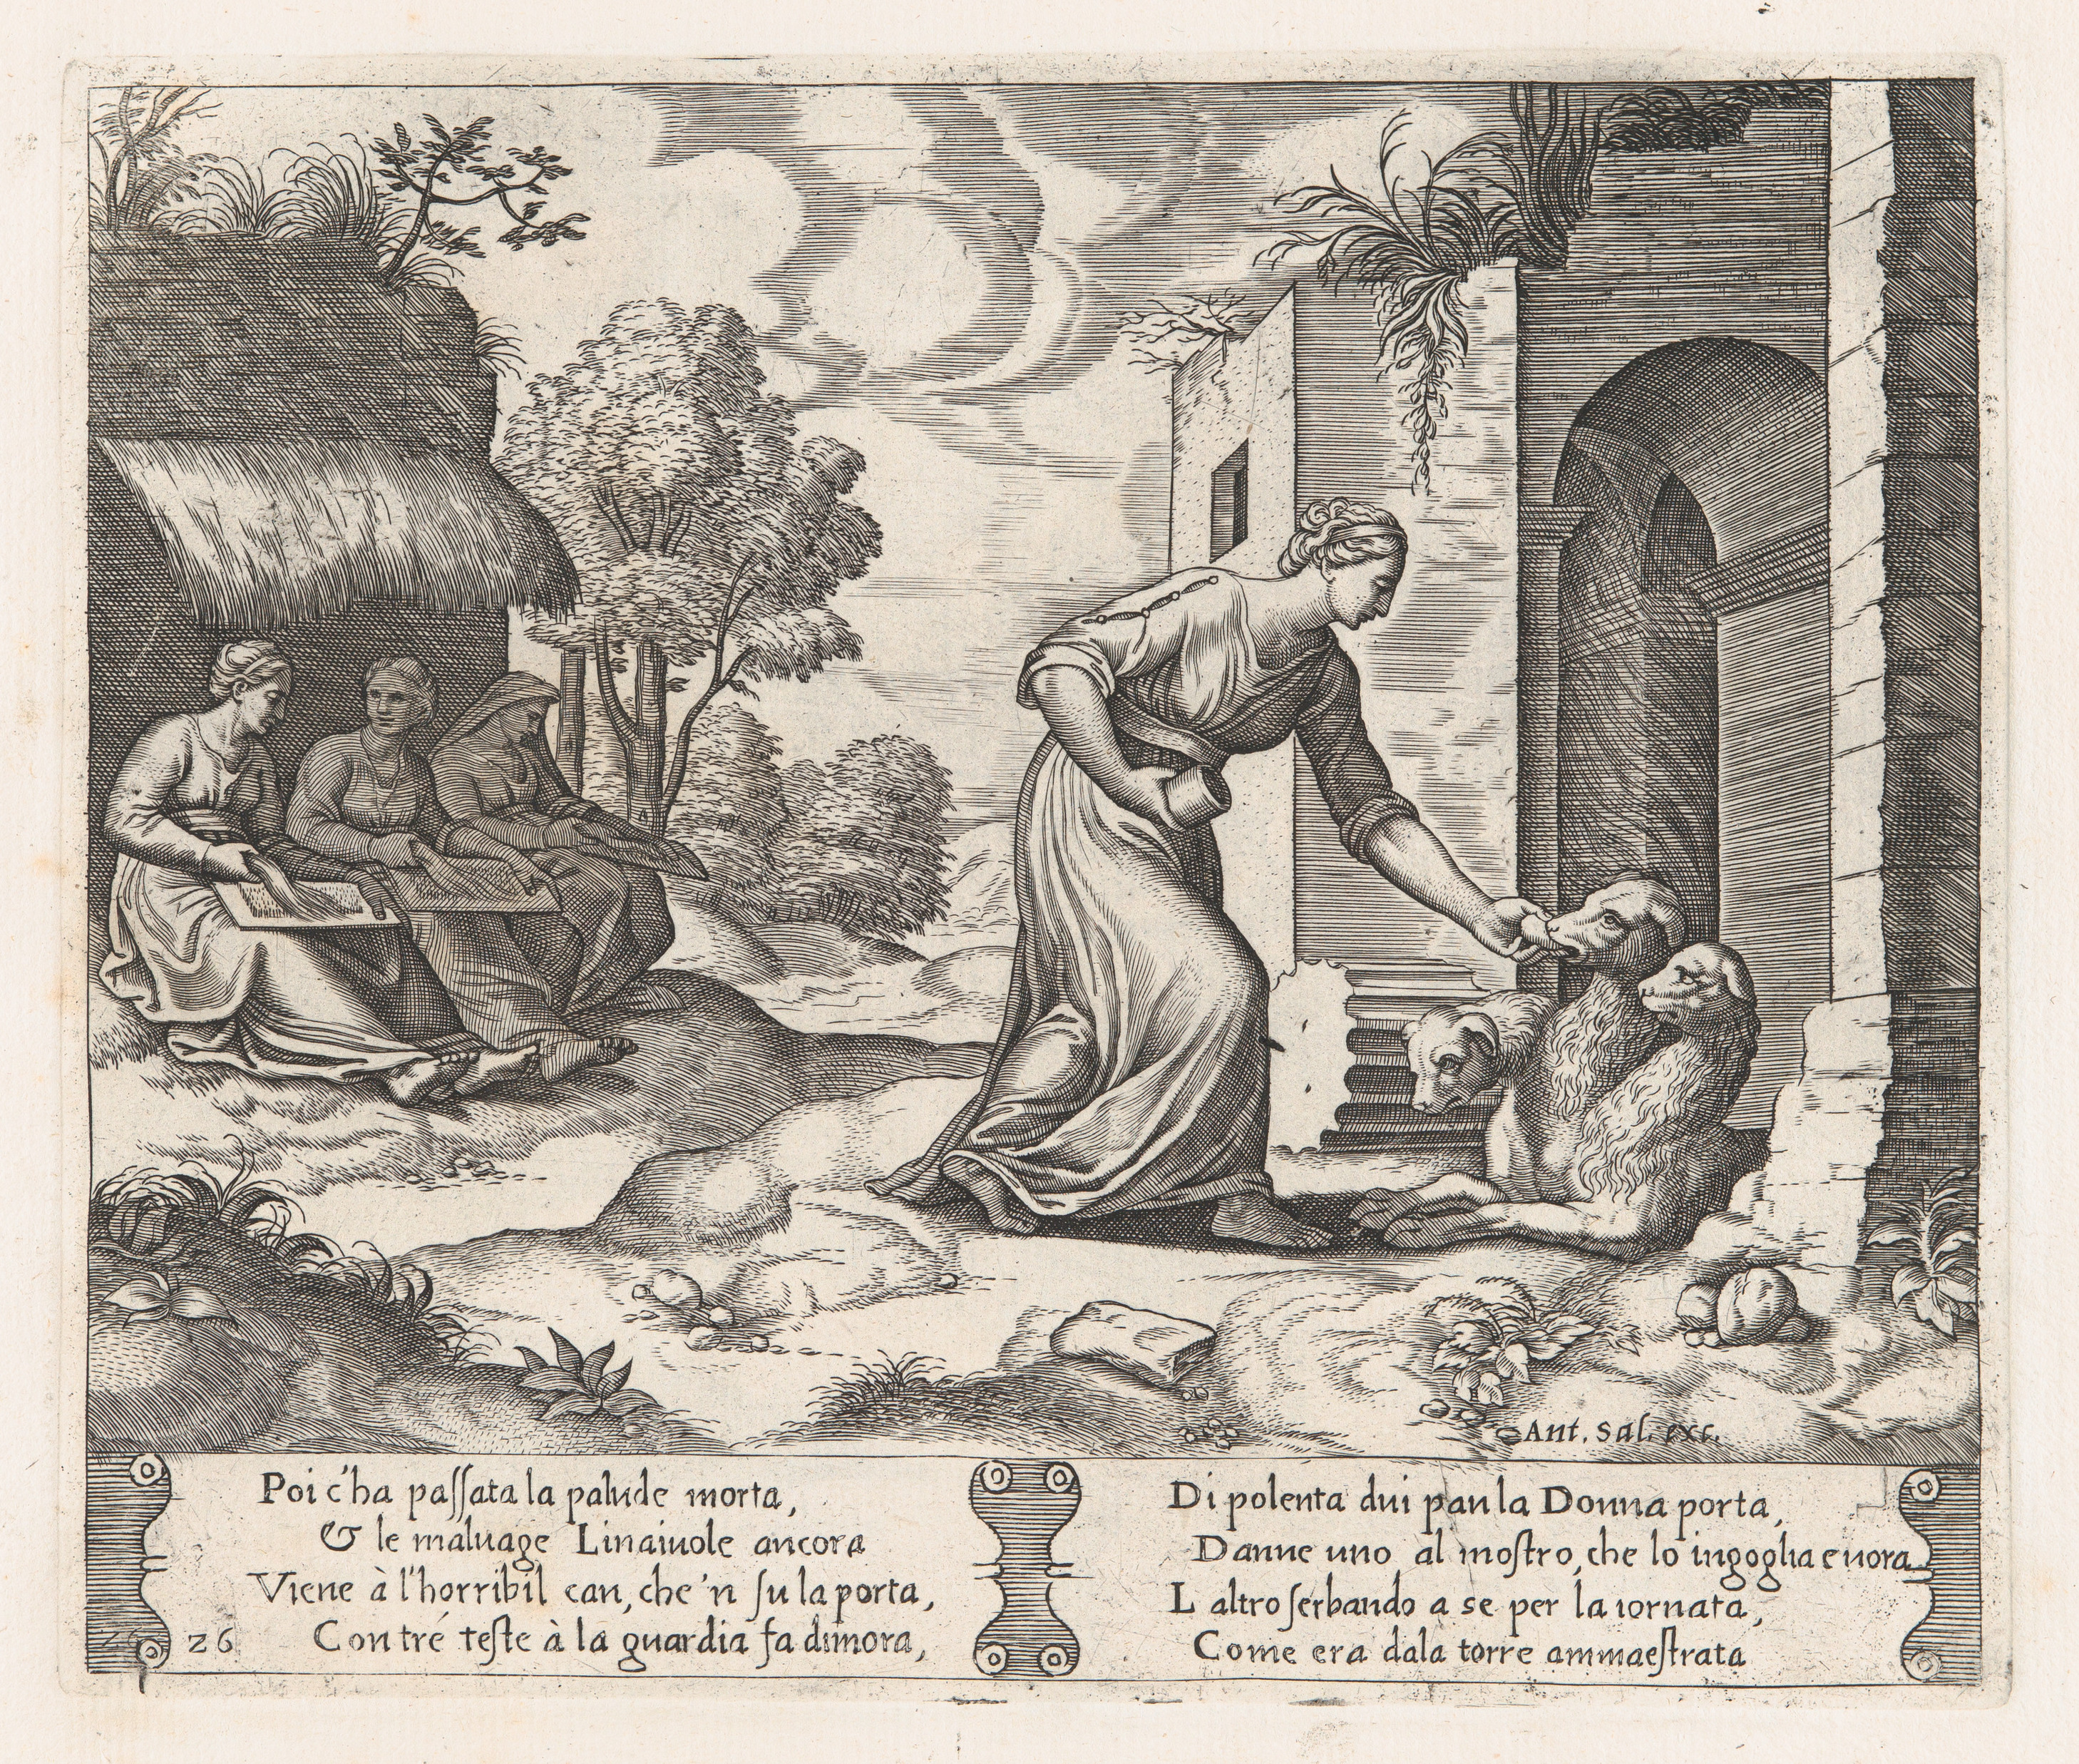 Plate_26-_Psyche_enters_the_underworld_giving_an_offering_to_Cerberus,_with_two_elderly_women_at_left,_from_the_Story_of_Cupid_and_Psyche_as_told_by_Apuleius_MET_DP862832.jpg